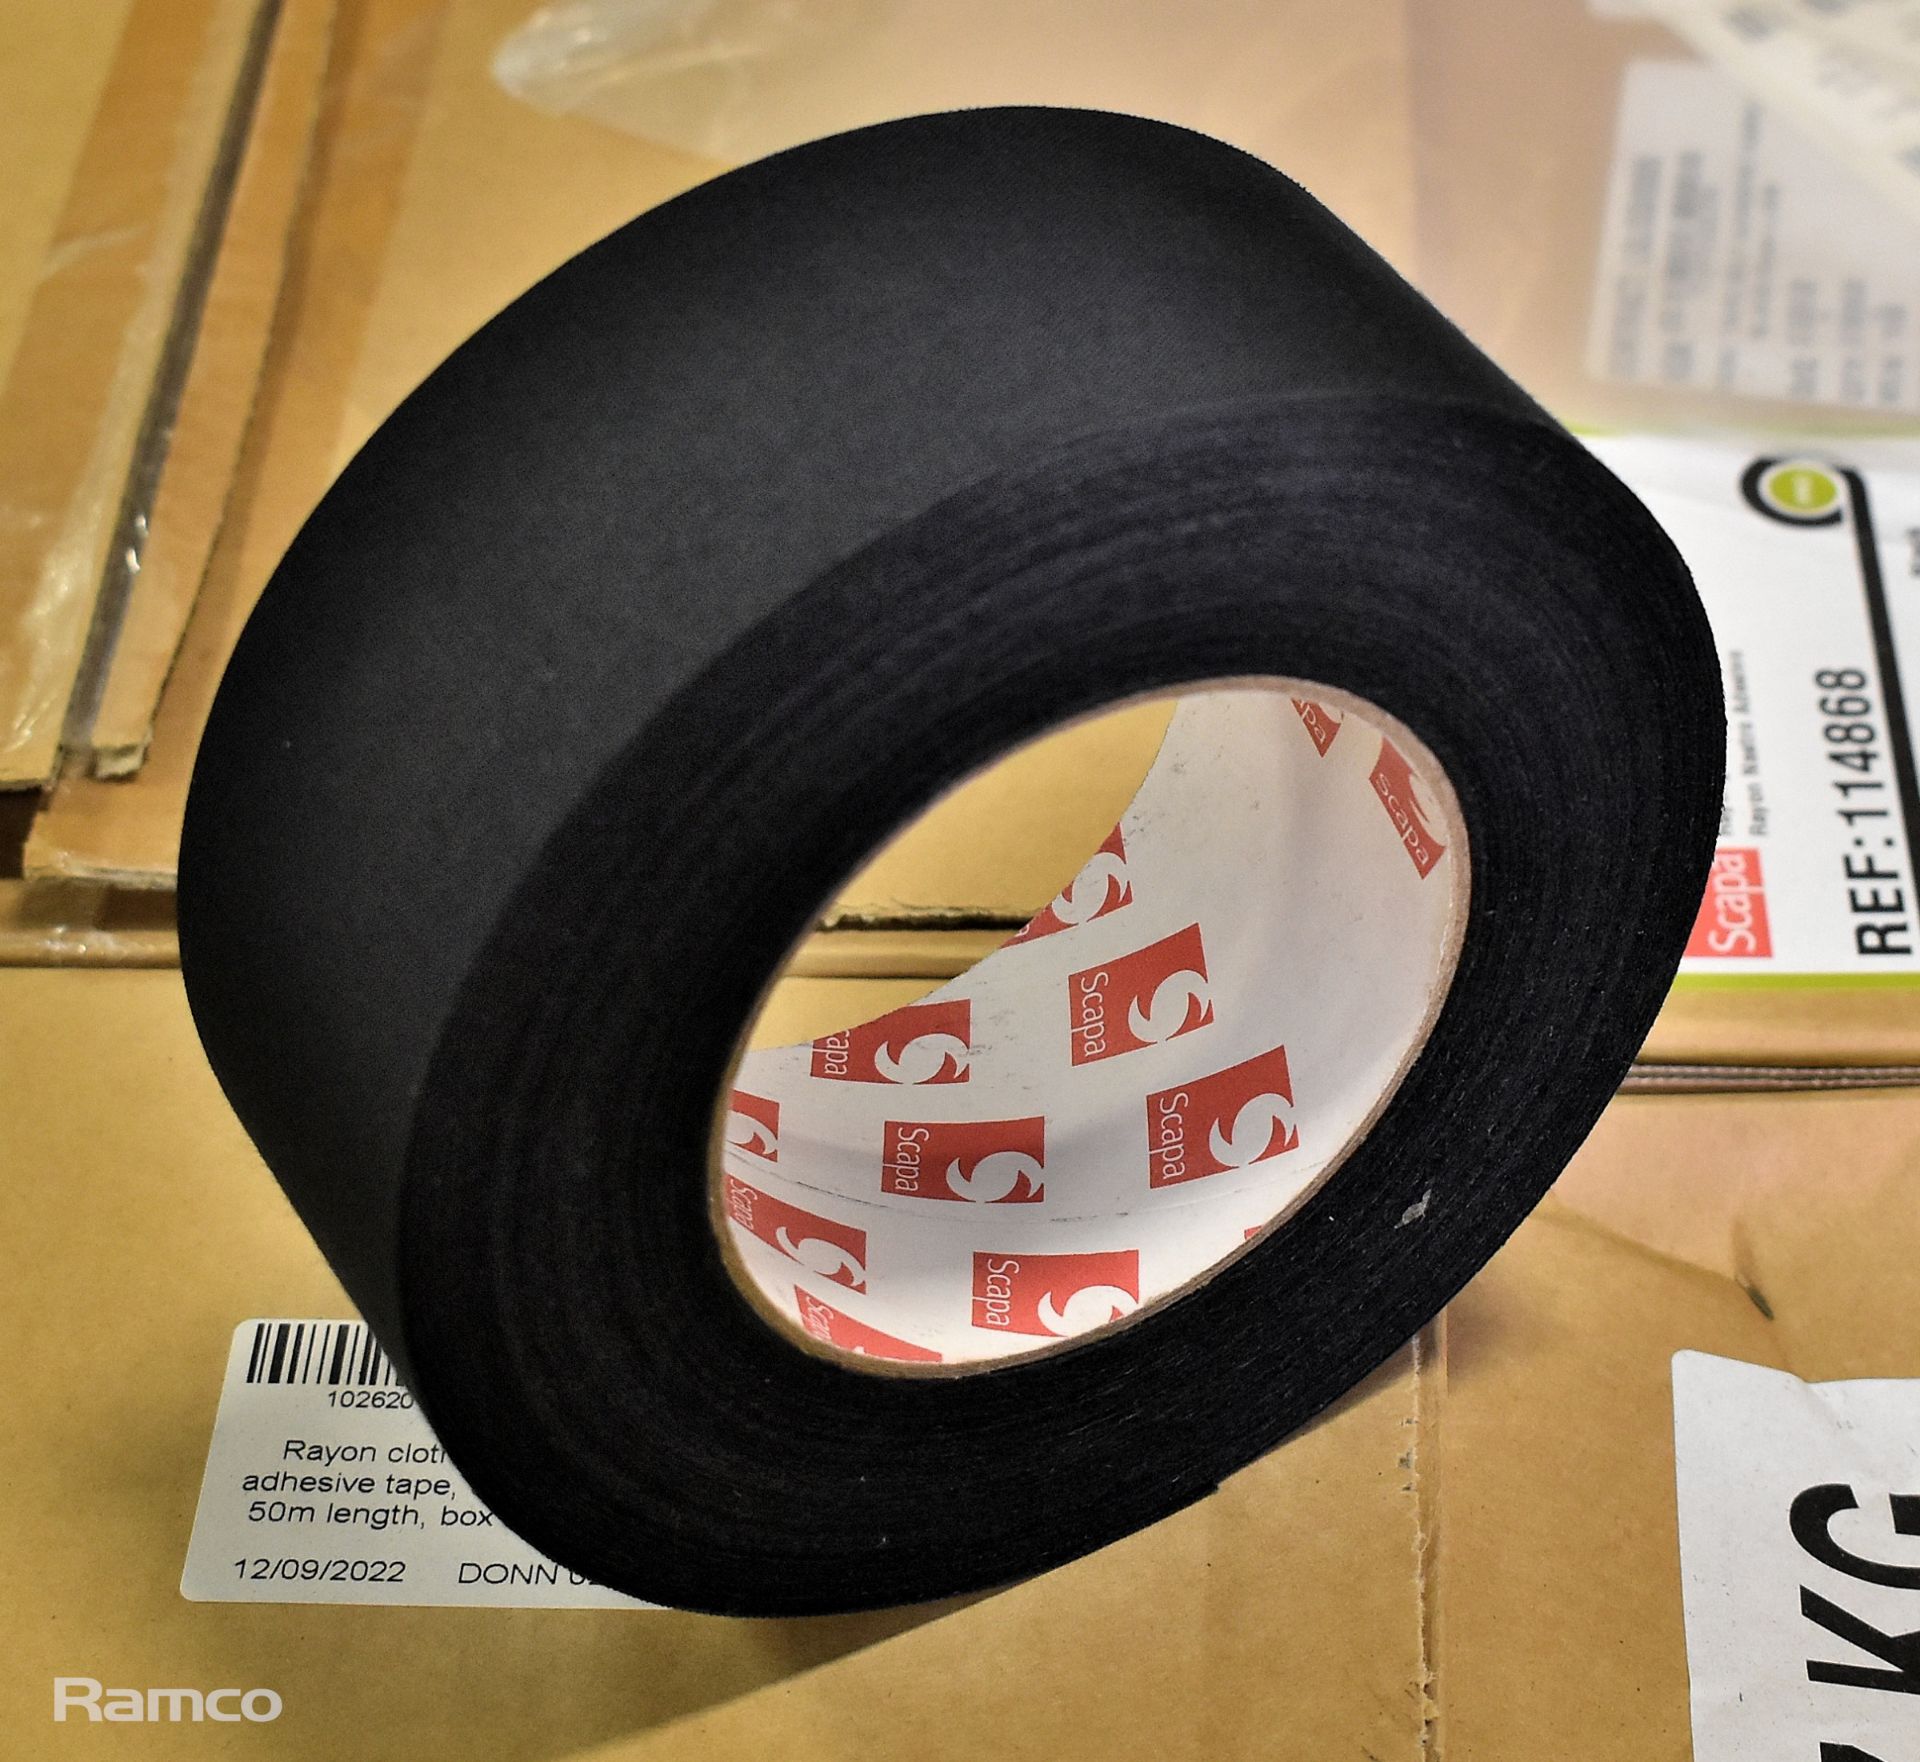 33x boxes of Scapa 3370 Rayon cloth fabric black adhesive tape - 50mm width - 50m length - Image 2 of 3